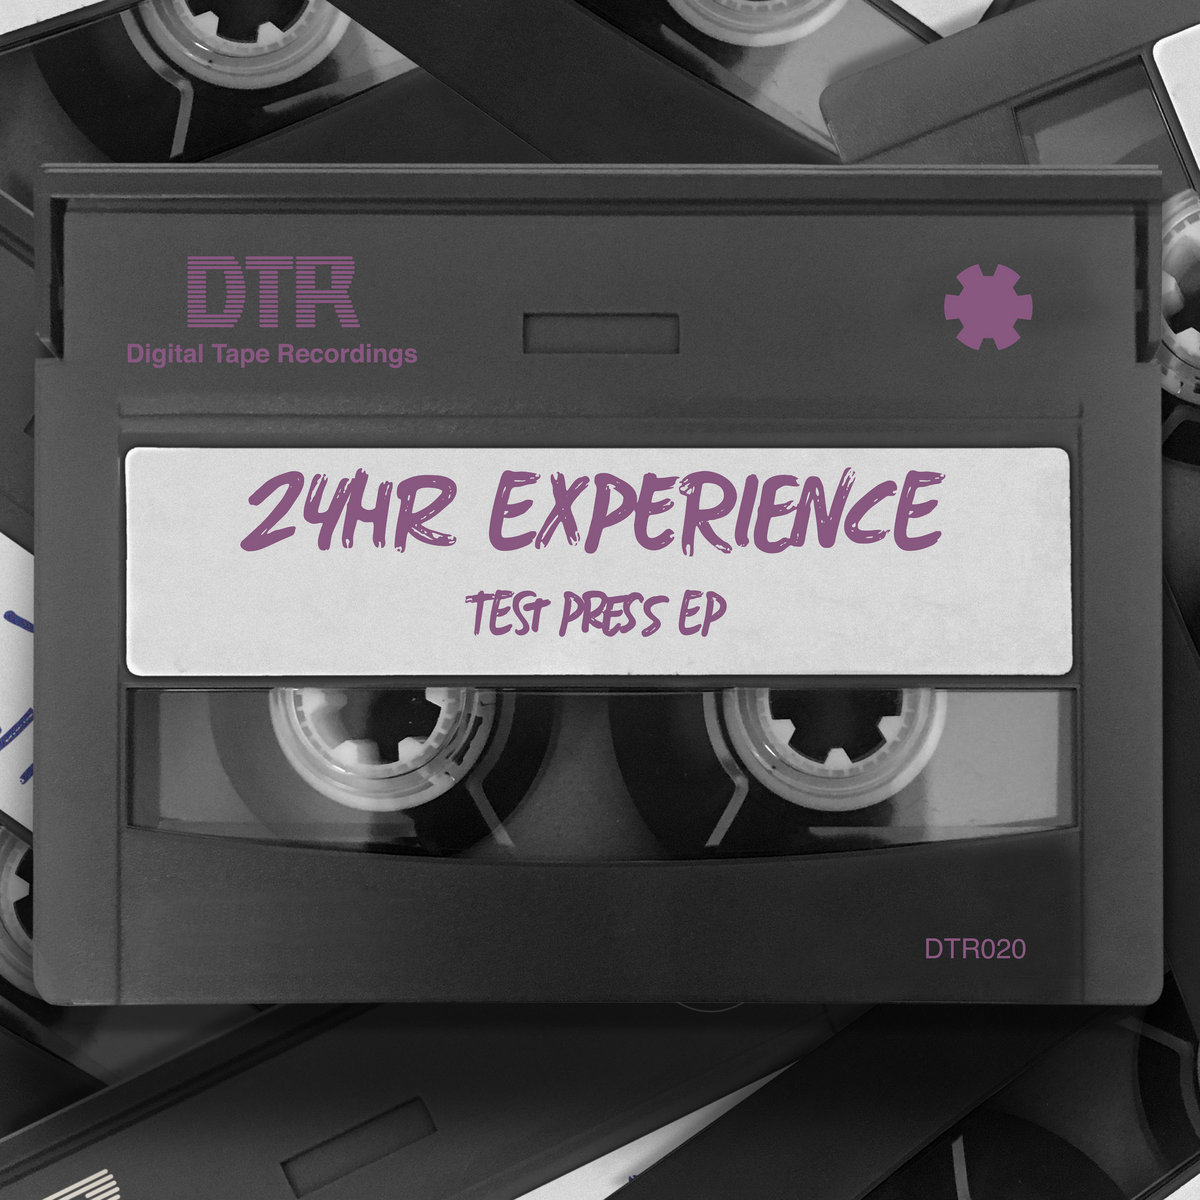 24 hr experience test press ep